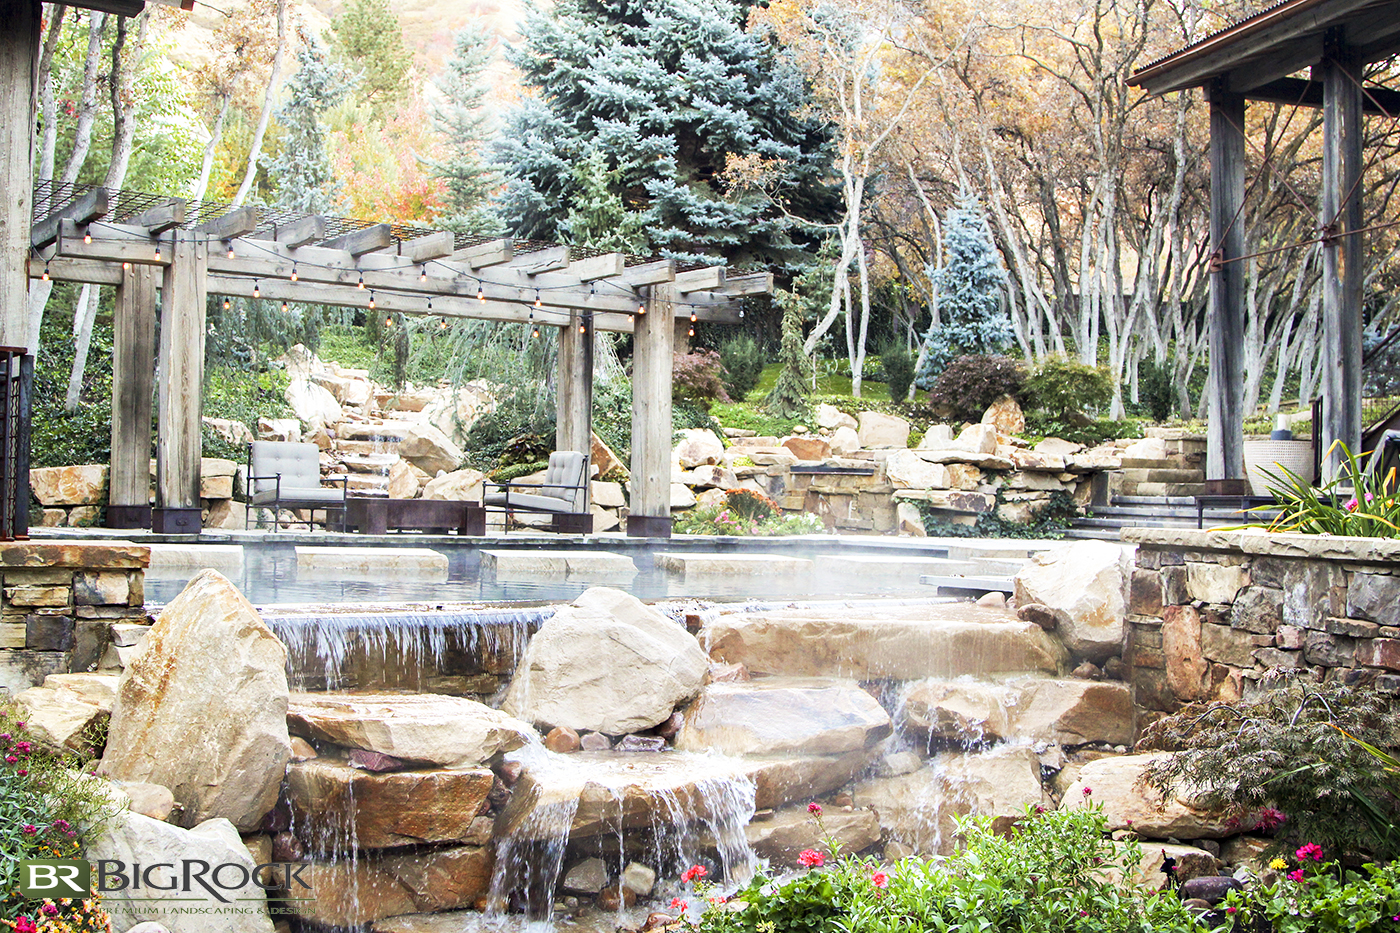 Rocks are low maintenance, require no water, and add interest and texture to any yard. With a little creativity, you can create a stunning rock garden that will be the envy of your neighborhood.